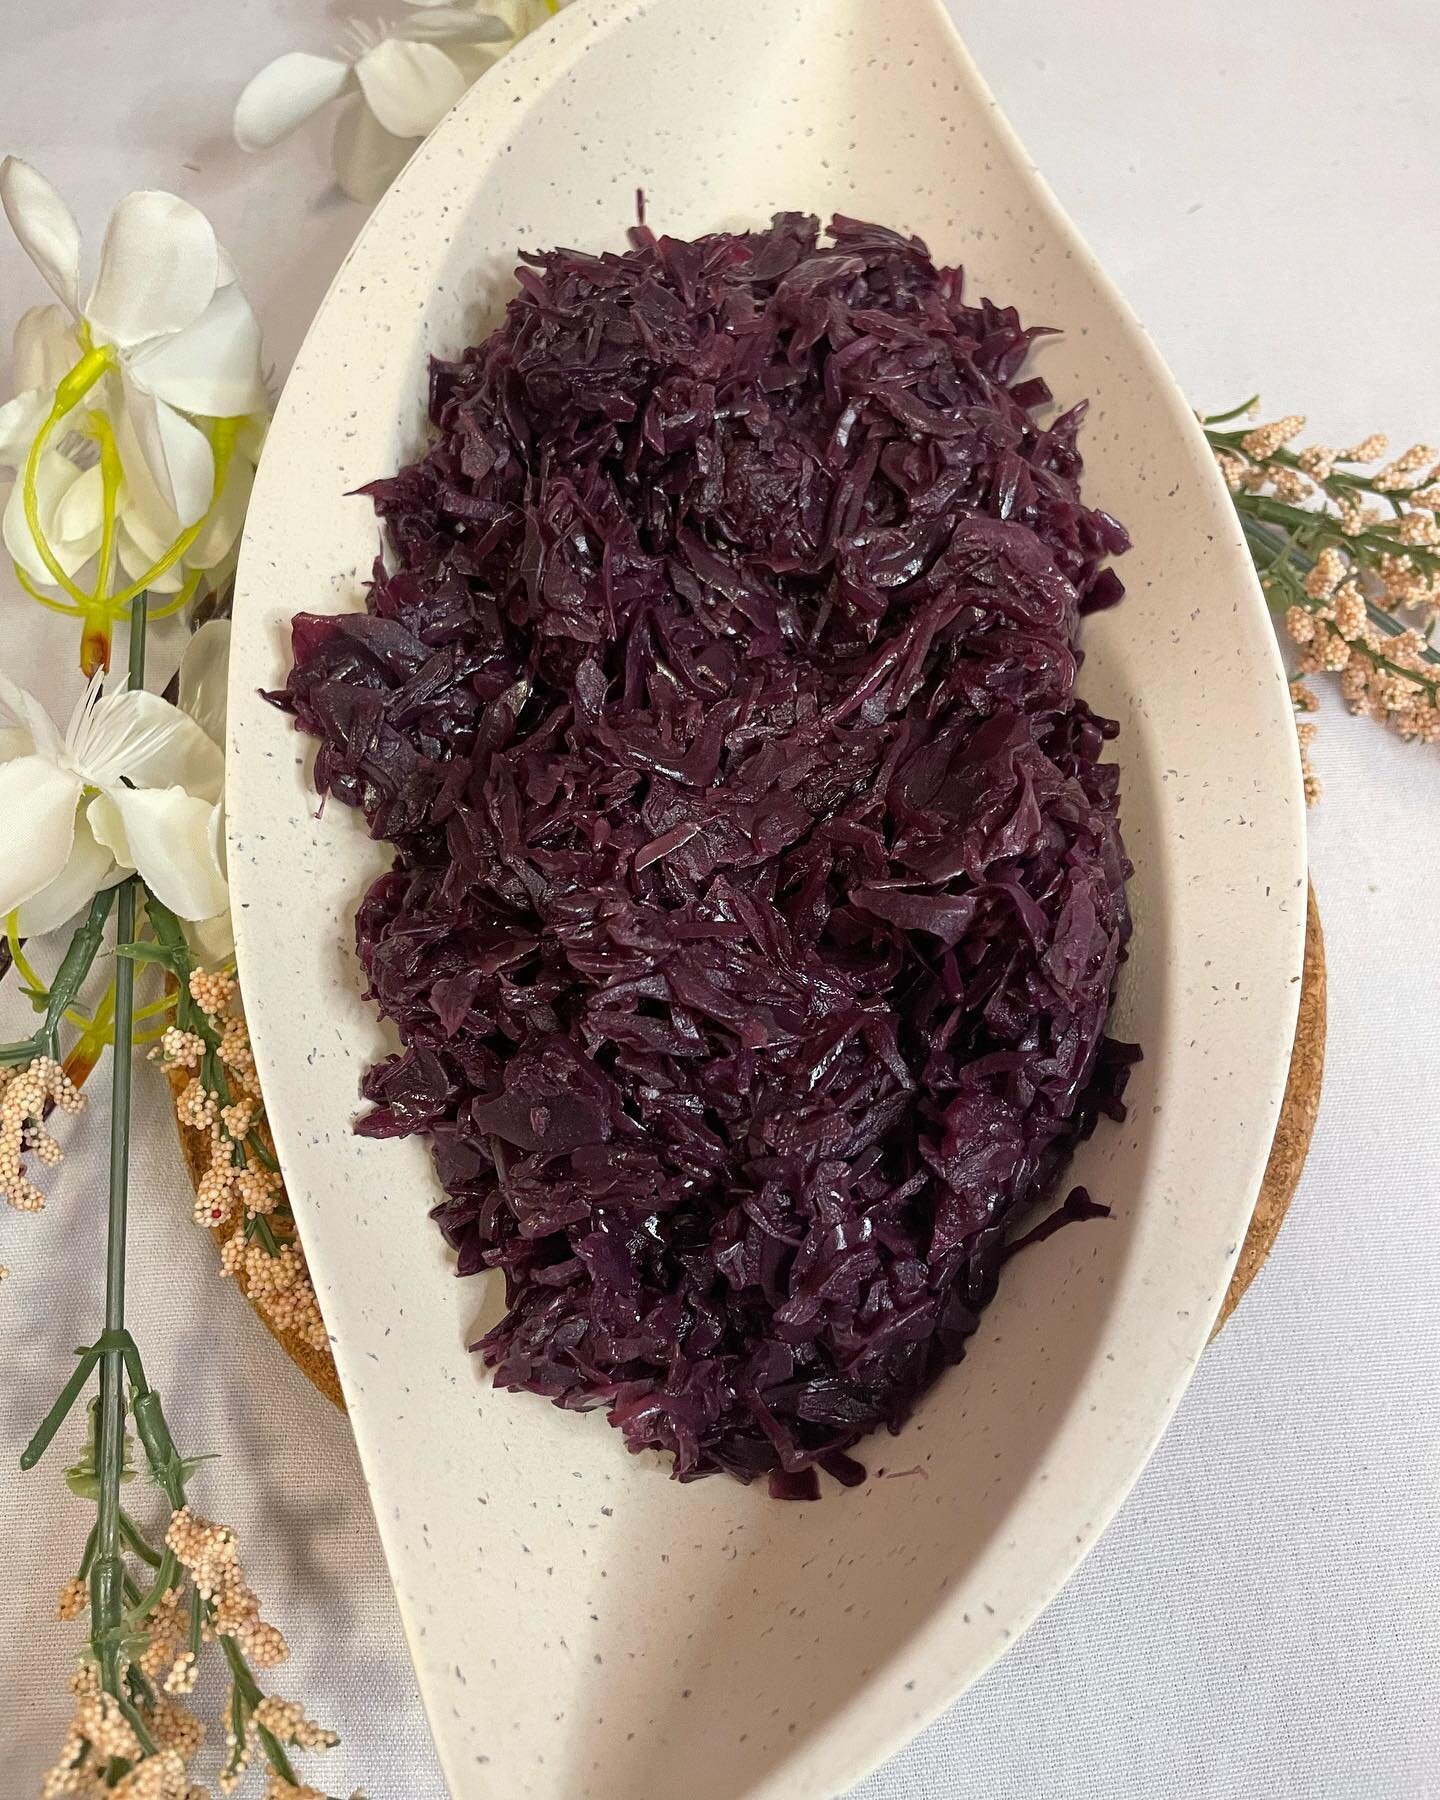 Braised Red Cabbage 

Simple &amp; delicious this braised red cabbage is a great side dish to have! 

Ingredients: 

- 2lb red cabbage, thinly sliced 
- 5oz onion, thinly sliced 
- 2 apples, peeled, cored, diced 
- 1/4 cup butter 
- 3 tbsp red wine v